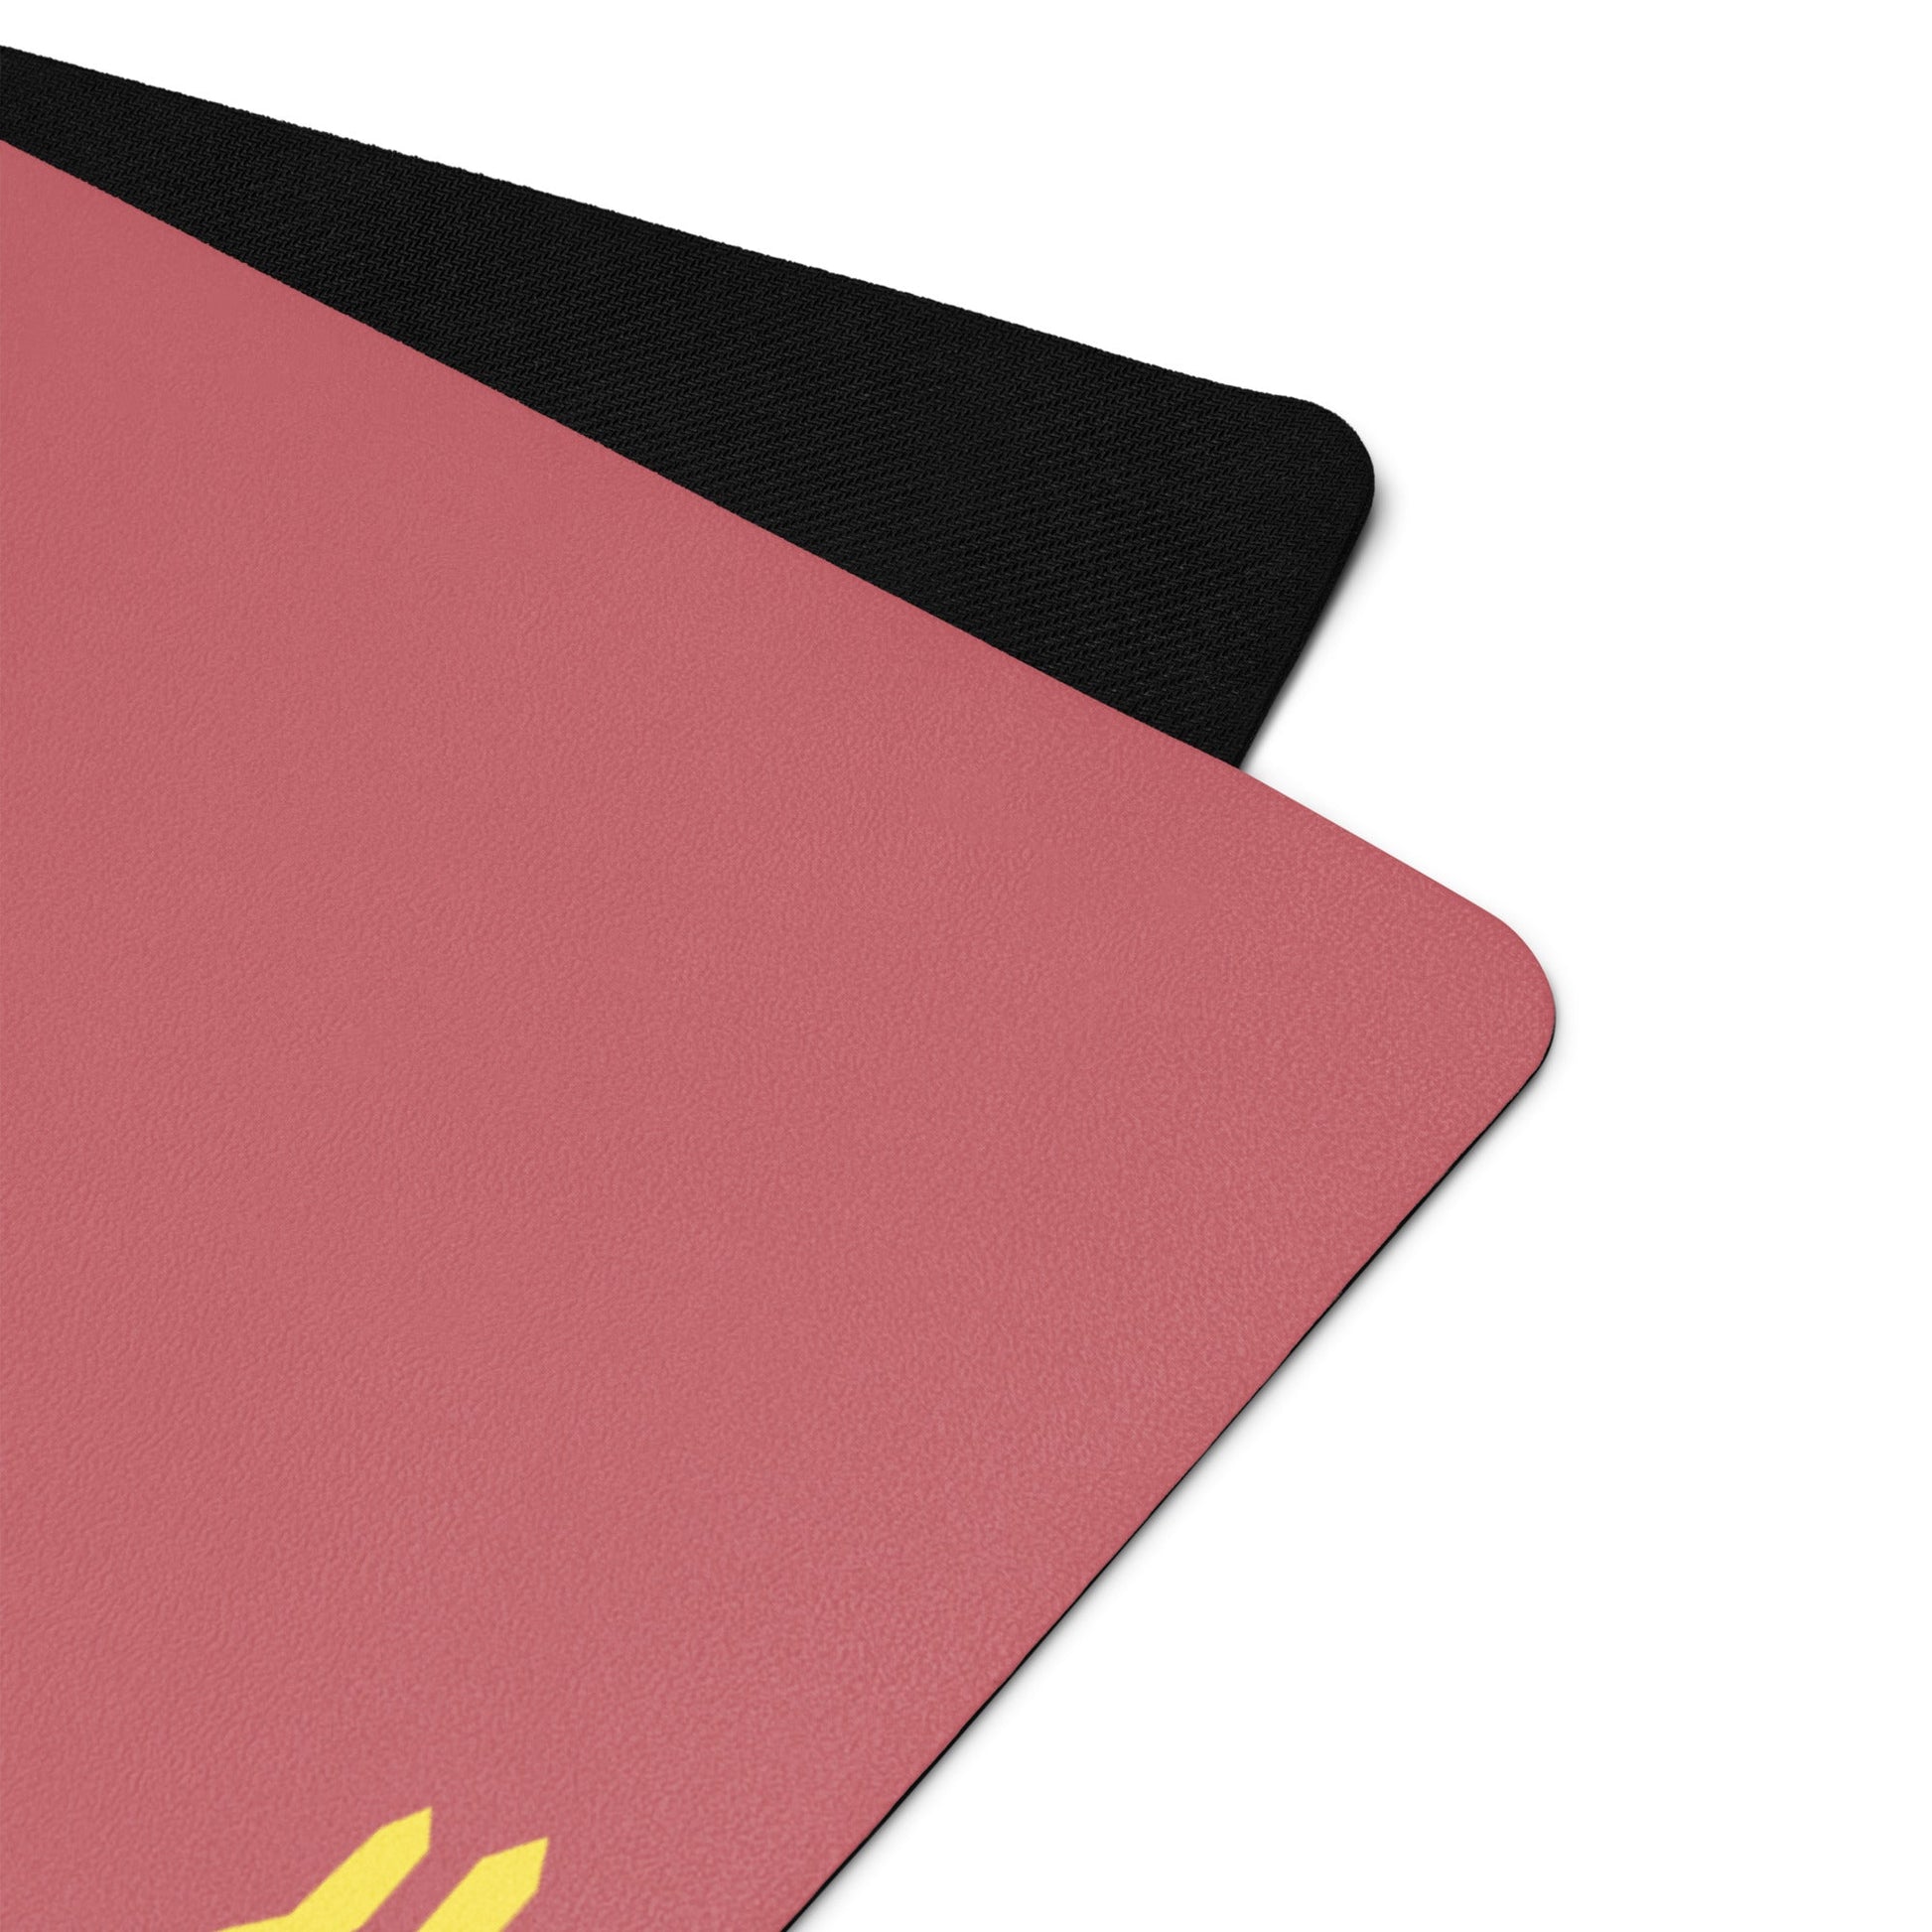 Elevate Your Practice: Unroll Serenity with Our Printed Yoga Mats